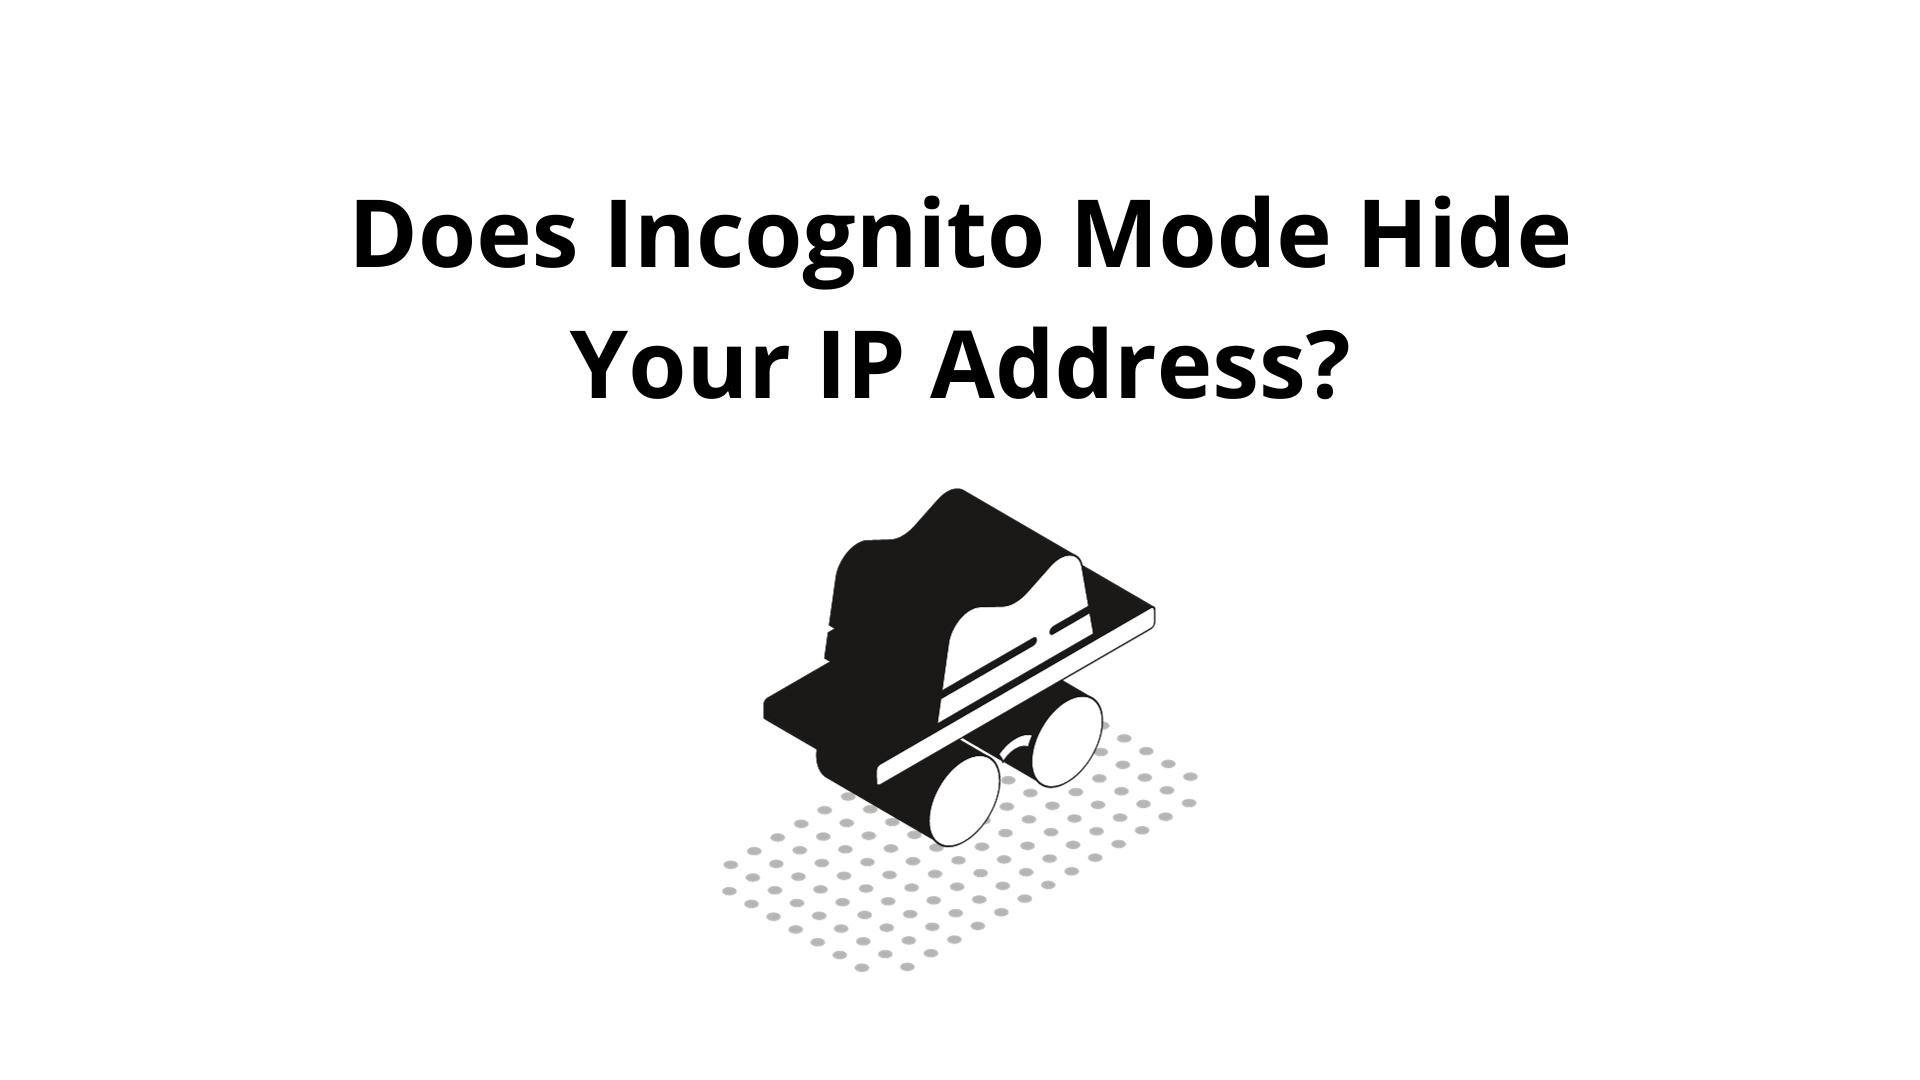 Does Incognito Mode Hide Your IP Address?